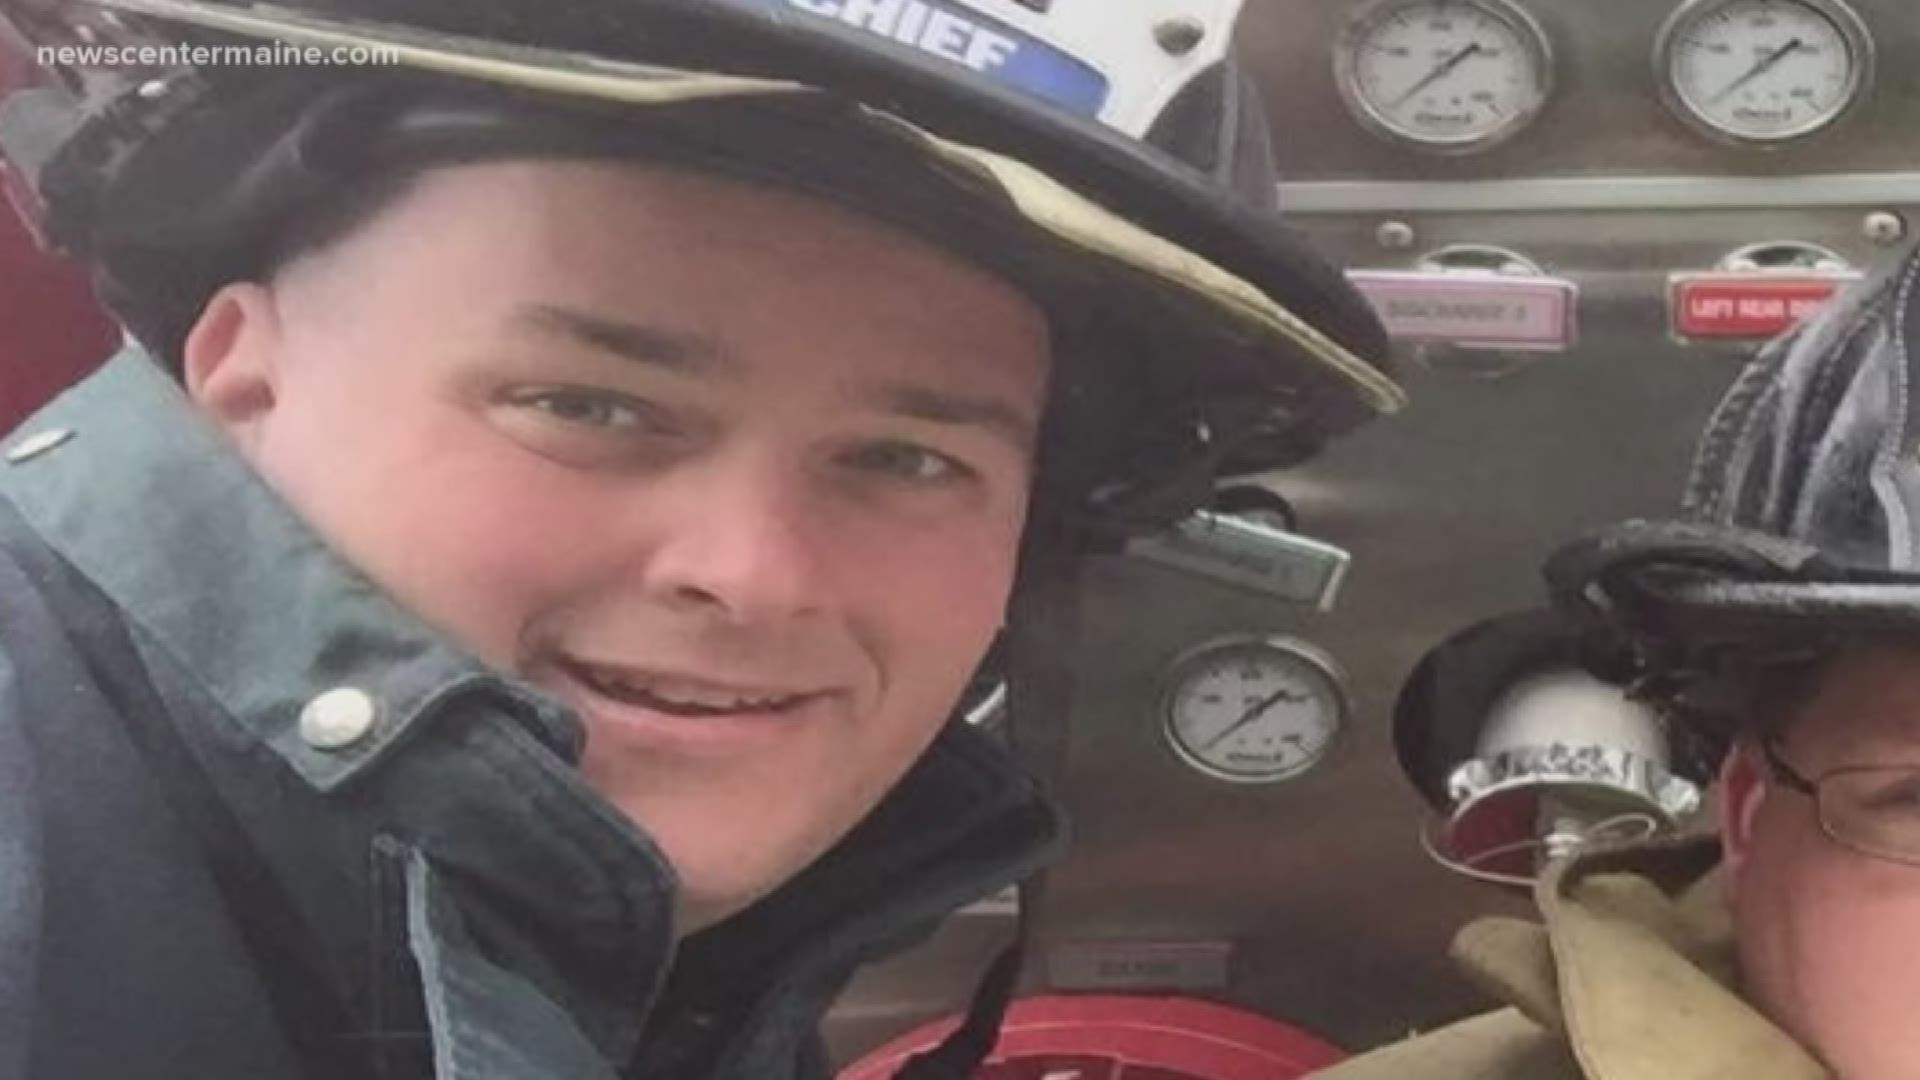 The Sebago community is rallying around firefighter Tim Smith, who has severe heart disease and requires a transplant.